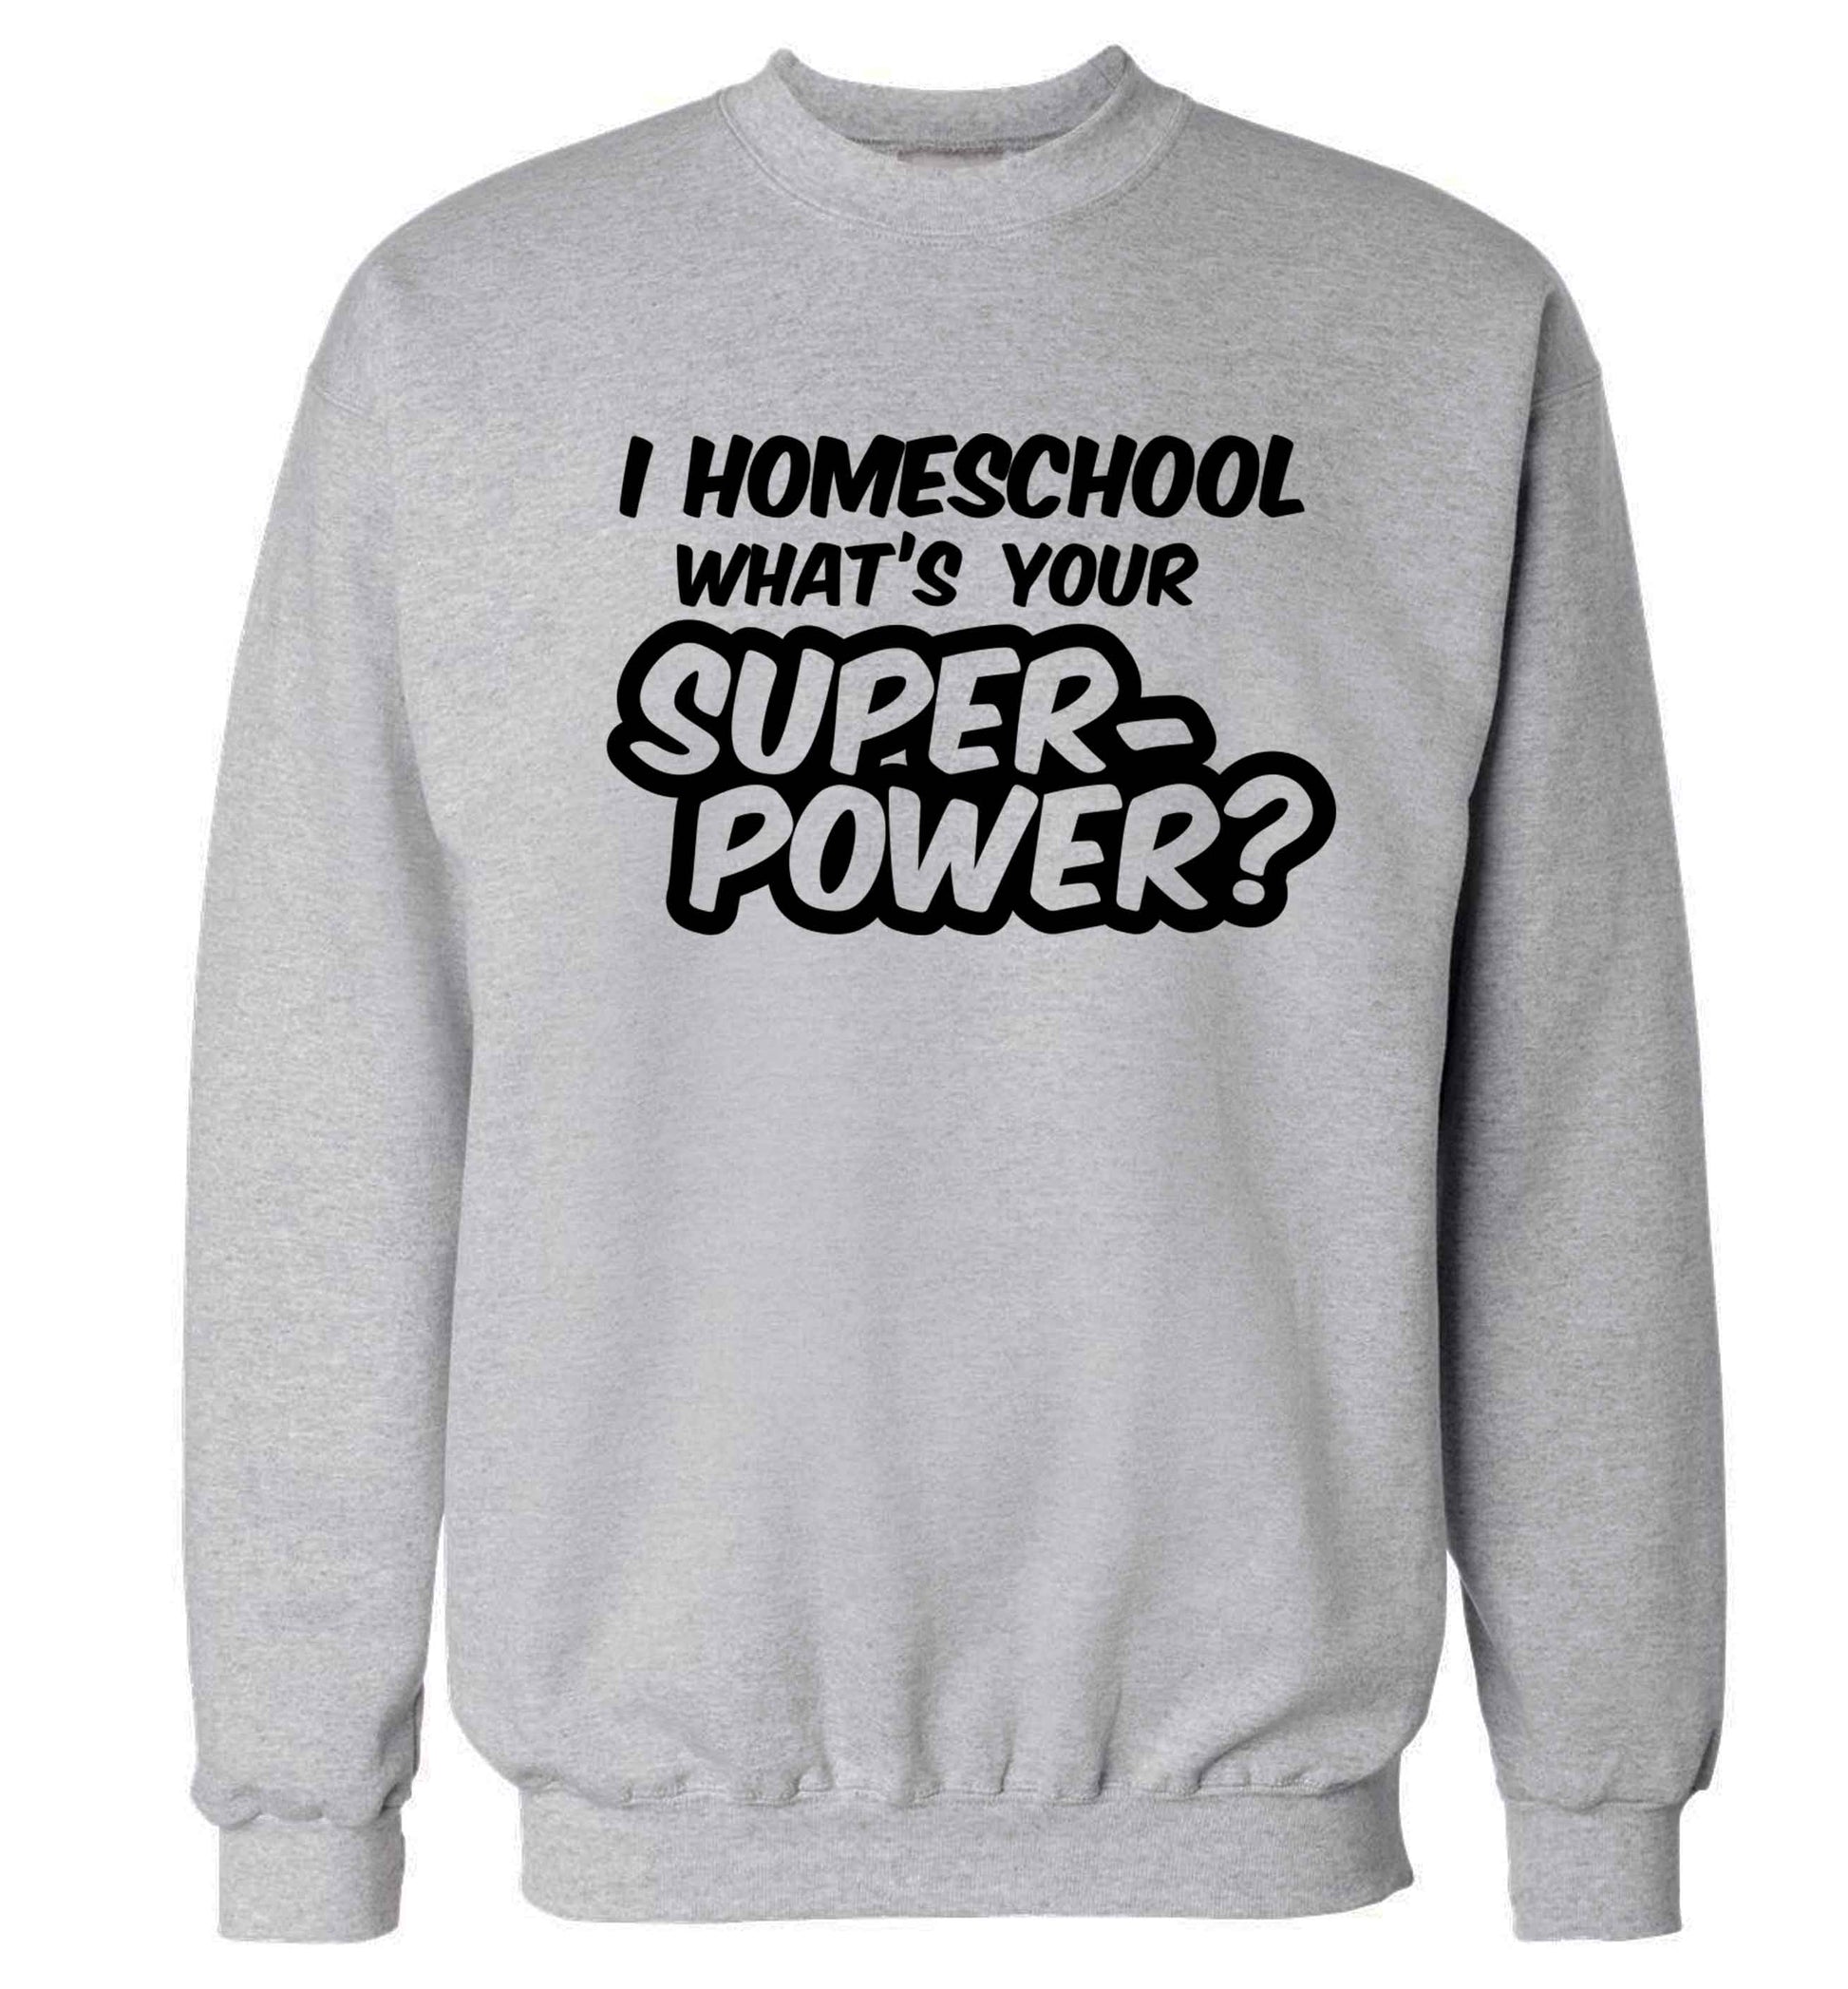 I homeschool what's your superpower? Adult's unisex grey Sweater 2XL